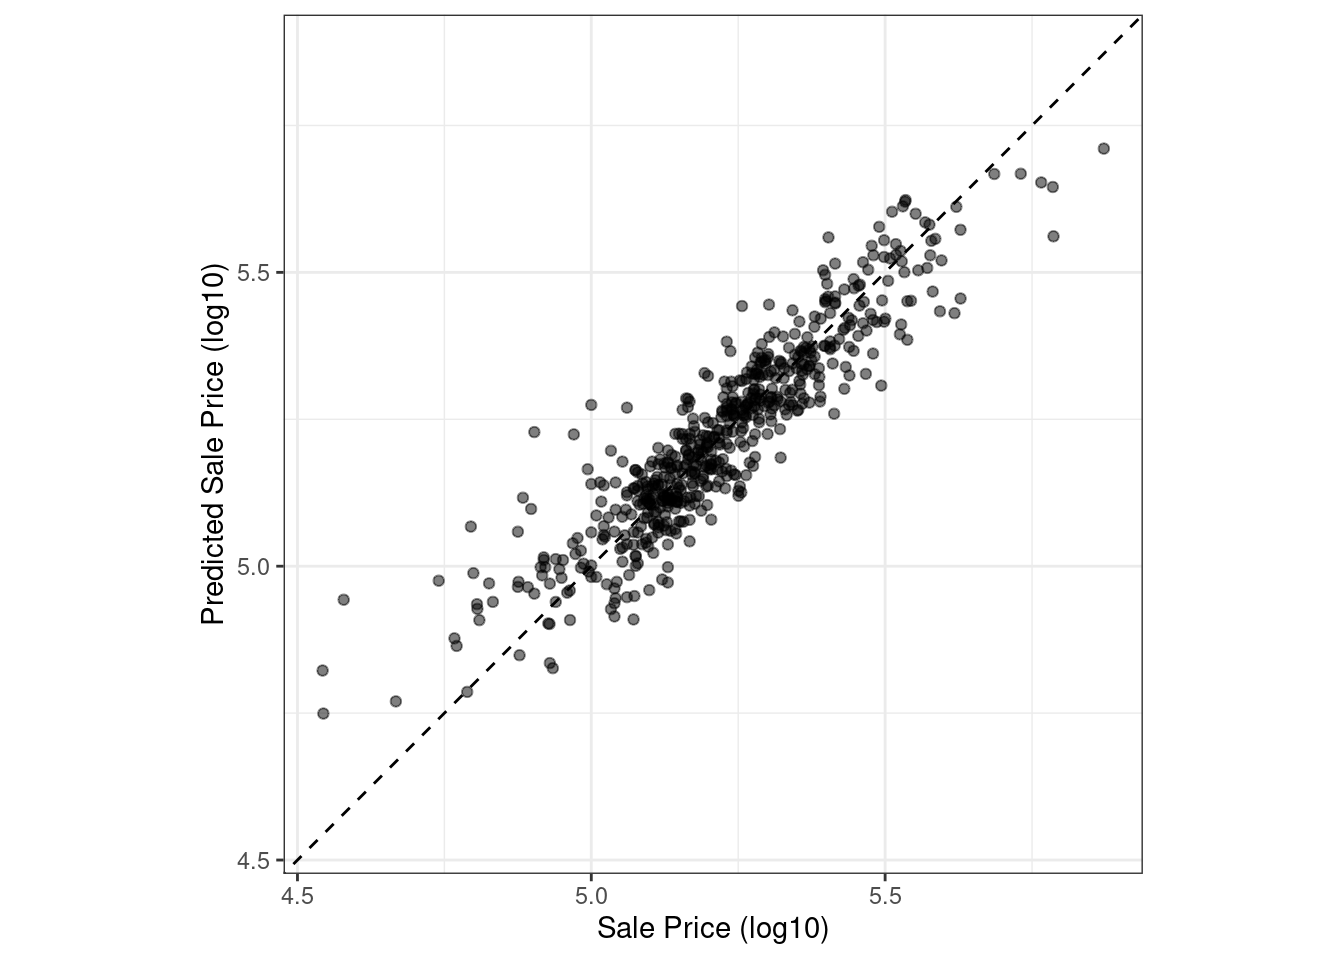 Scatter plots of numeric observed versus predicted values for an Ames regression model. Both axes use log-10 units. The model shows good concordance with some poorly fitting points at high and low prices.